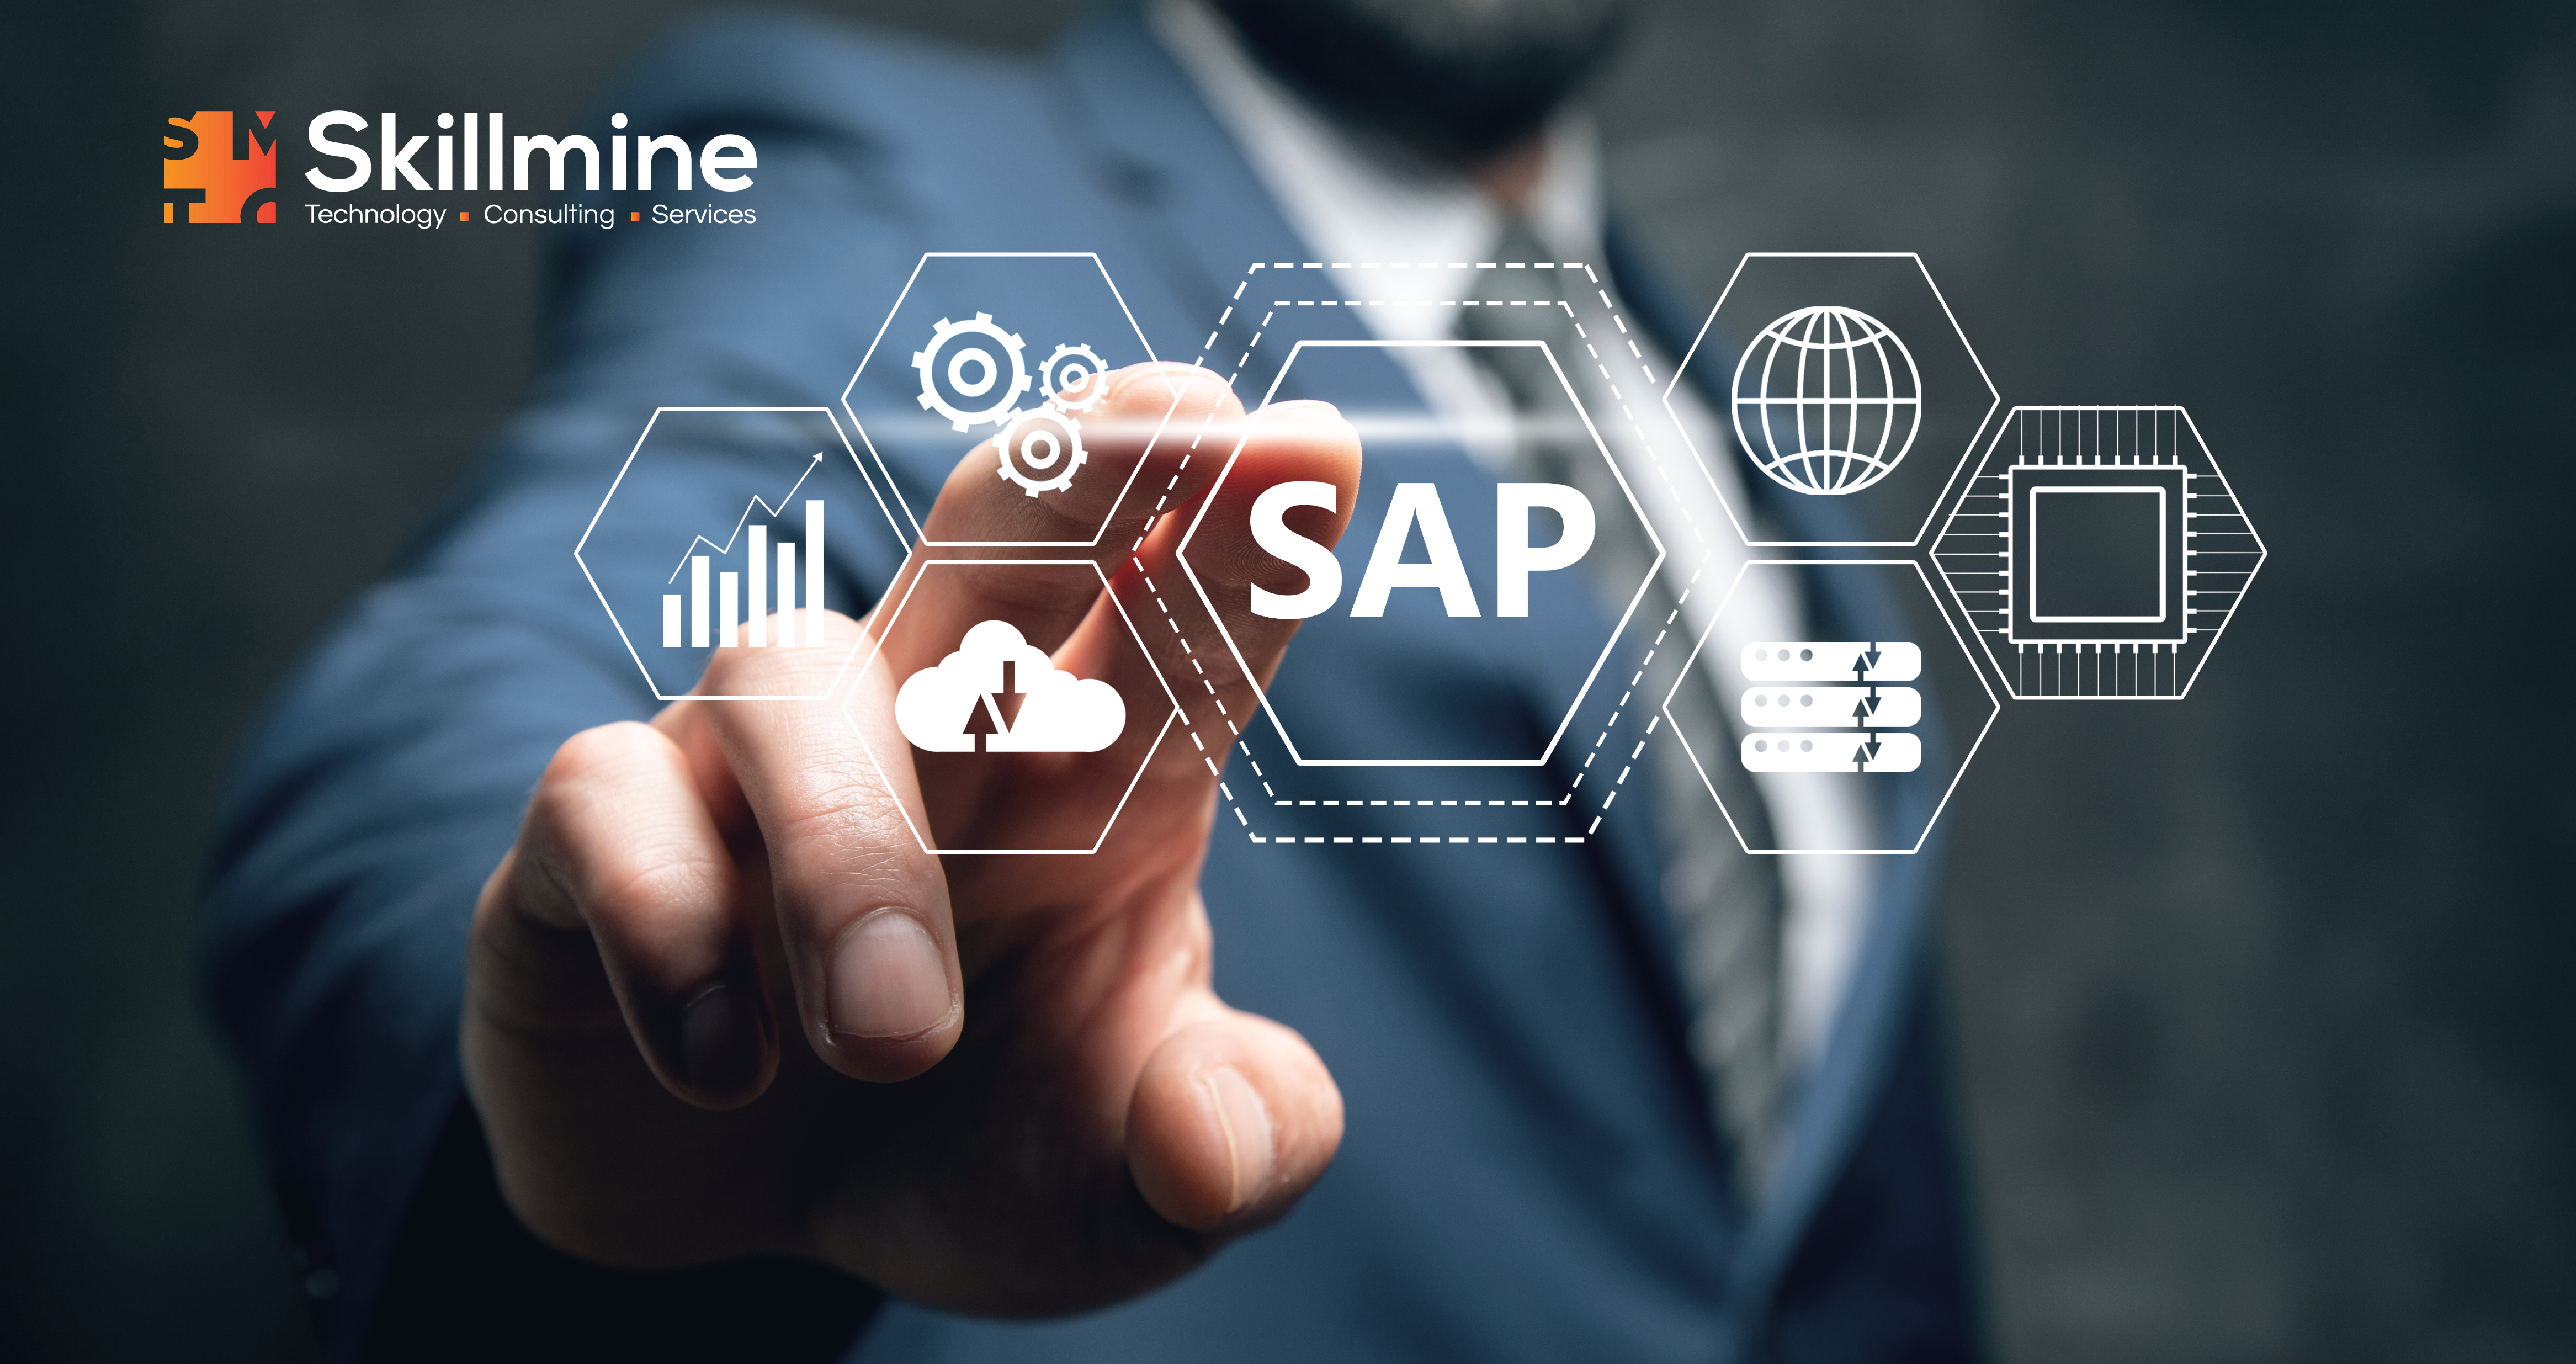 Key Factors to Consider When Choosing a SAP Consulting Partner